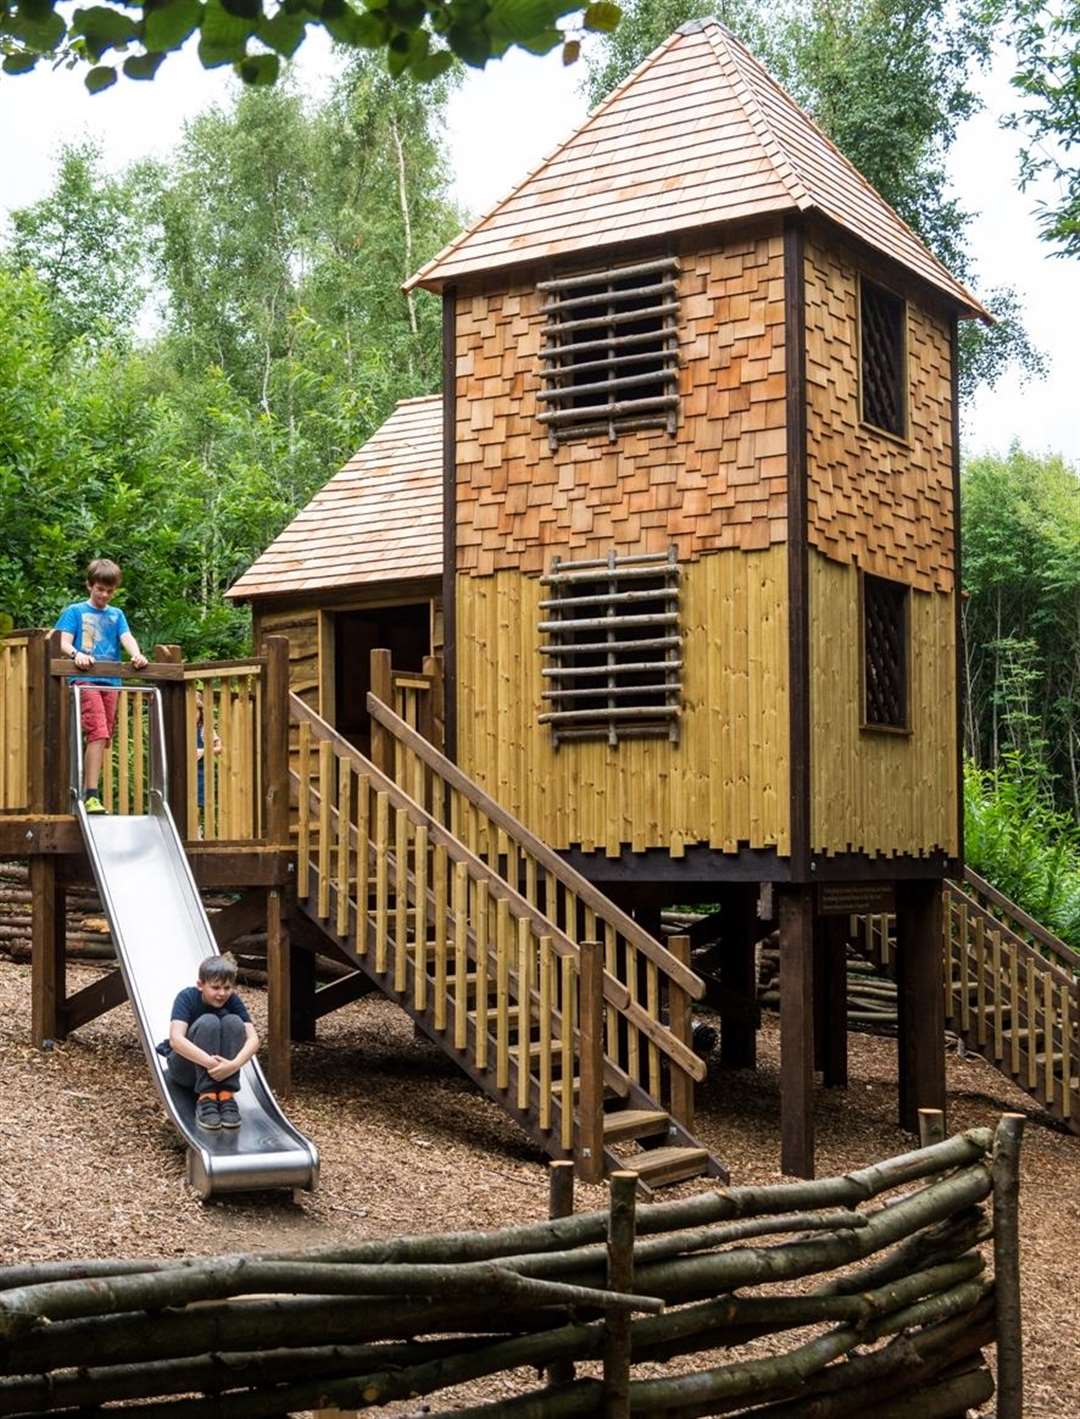 The new Chartwell Treehouse